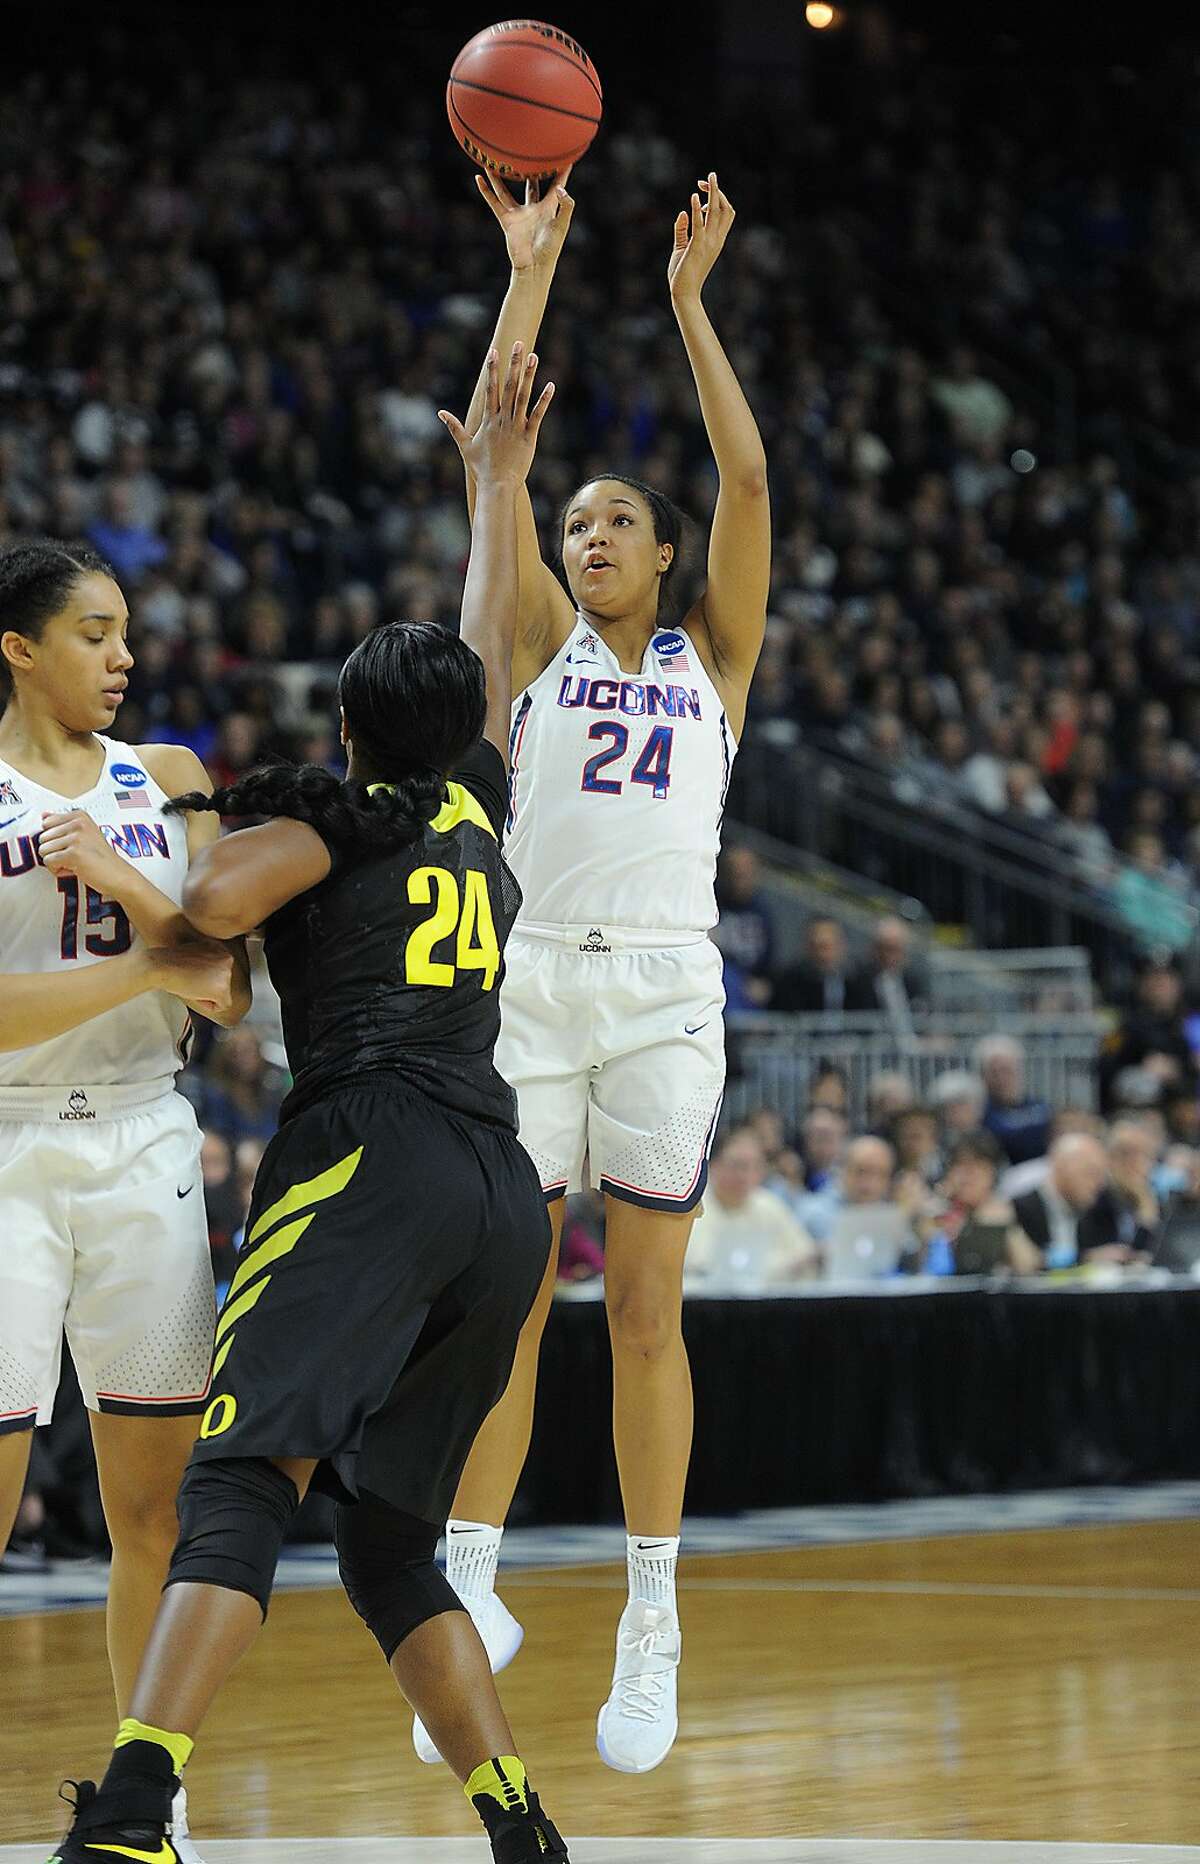 UConn defeats Oregon in the NCAA Women's Basketball Regional Final game at the Webster Bank Arena in Bridgeport, Conn. on Monday, March 27, 2017.